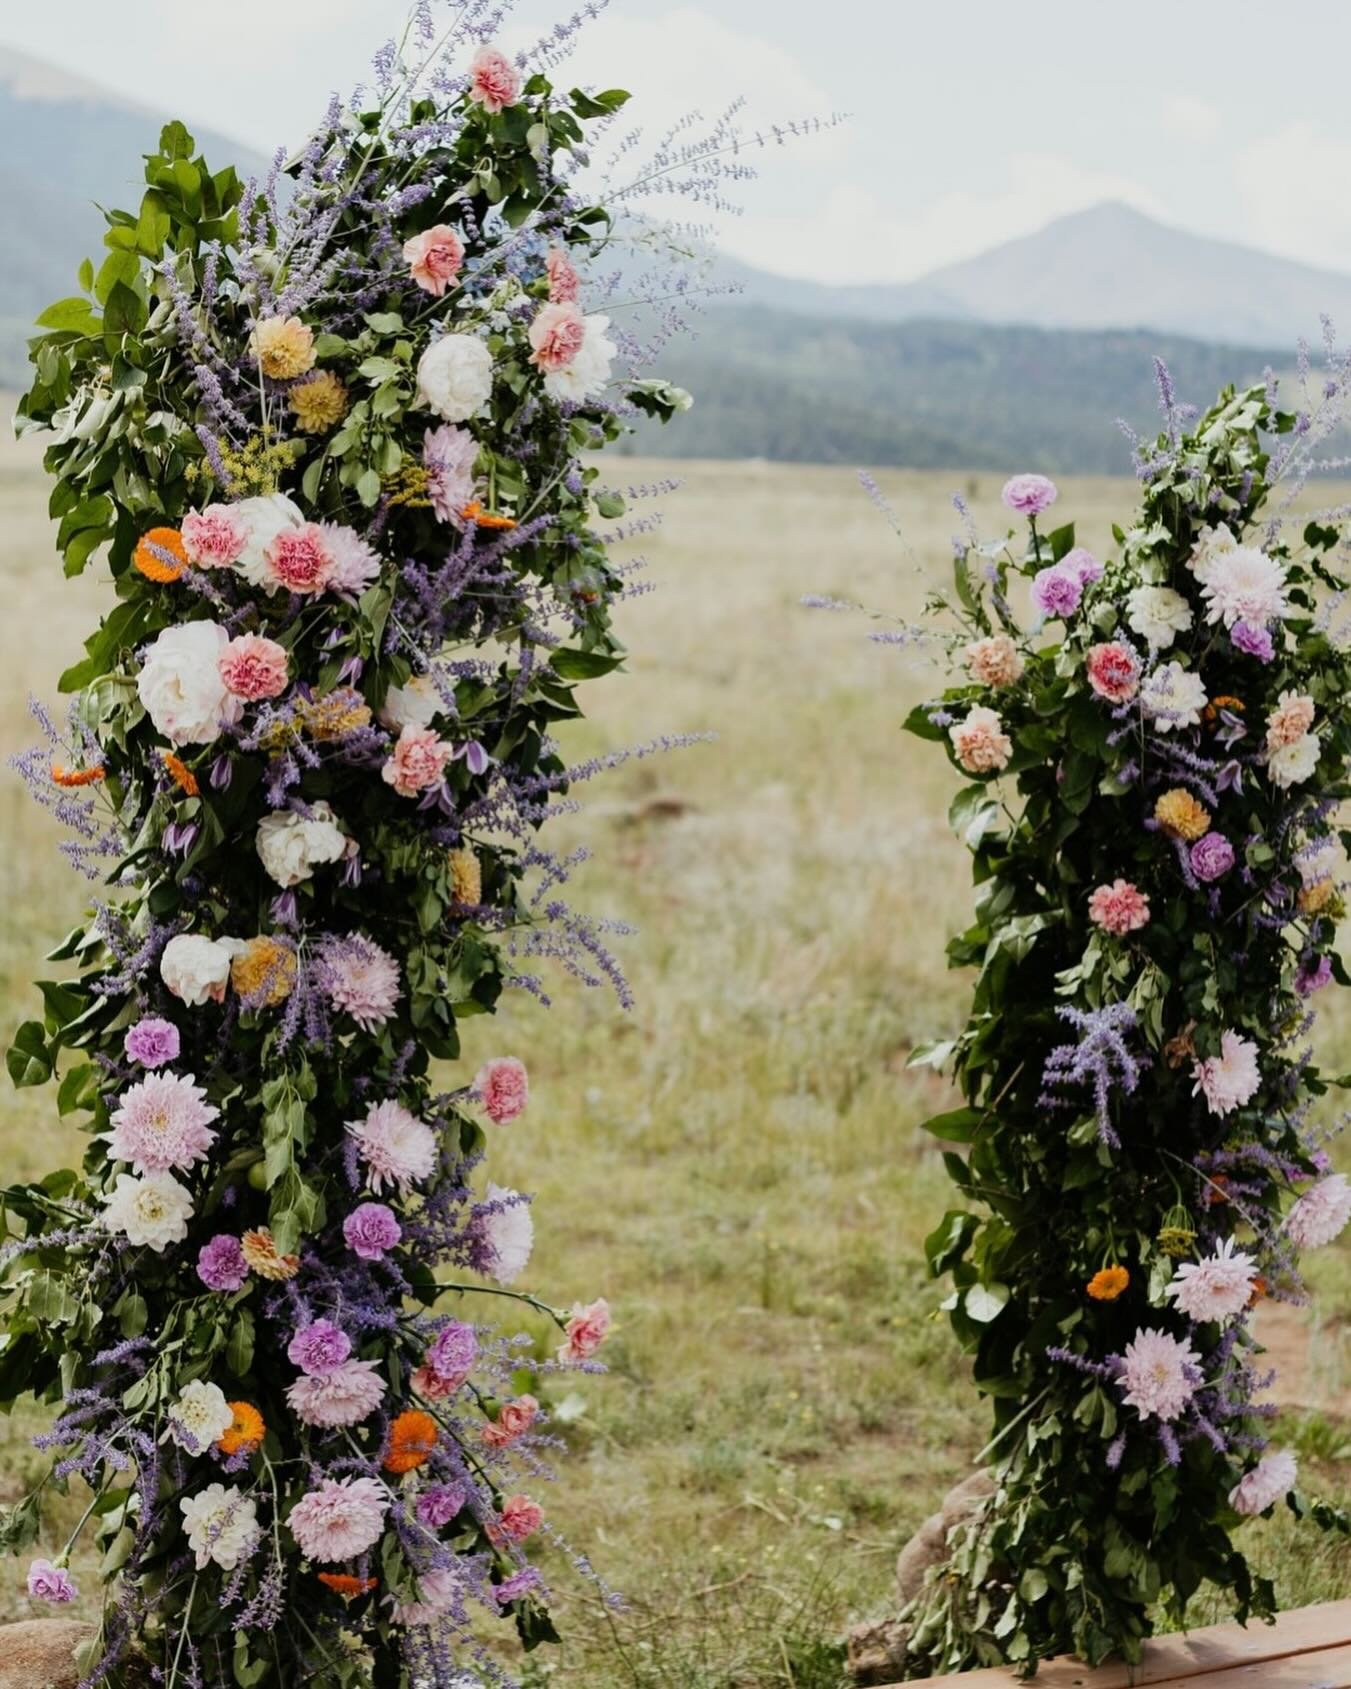 Say &ldquo;I do&rdquo; to incorporating floral arches that compliment the natural beauty of your outdoor ceremony 

Planning/ Coordination: @weddingsbyjay_ 
Photographer: @chelseabeamerphotography 
Videographer: @storyboxfilm 
Venue: @thethreepeaksra